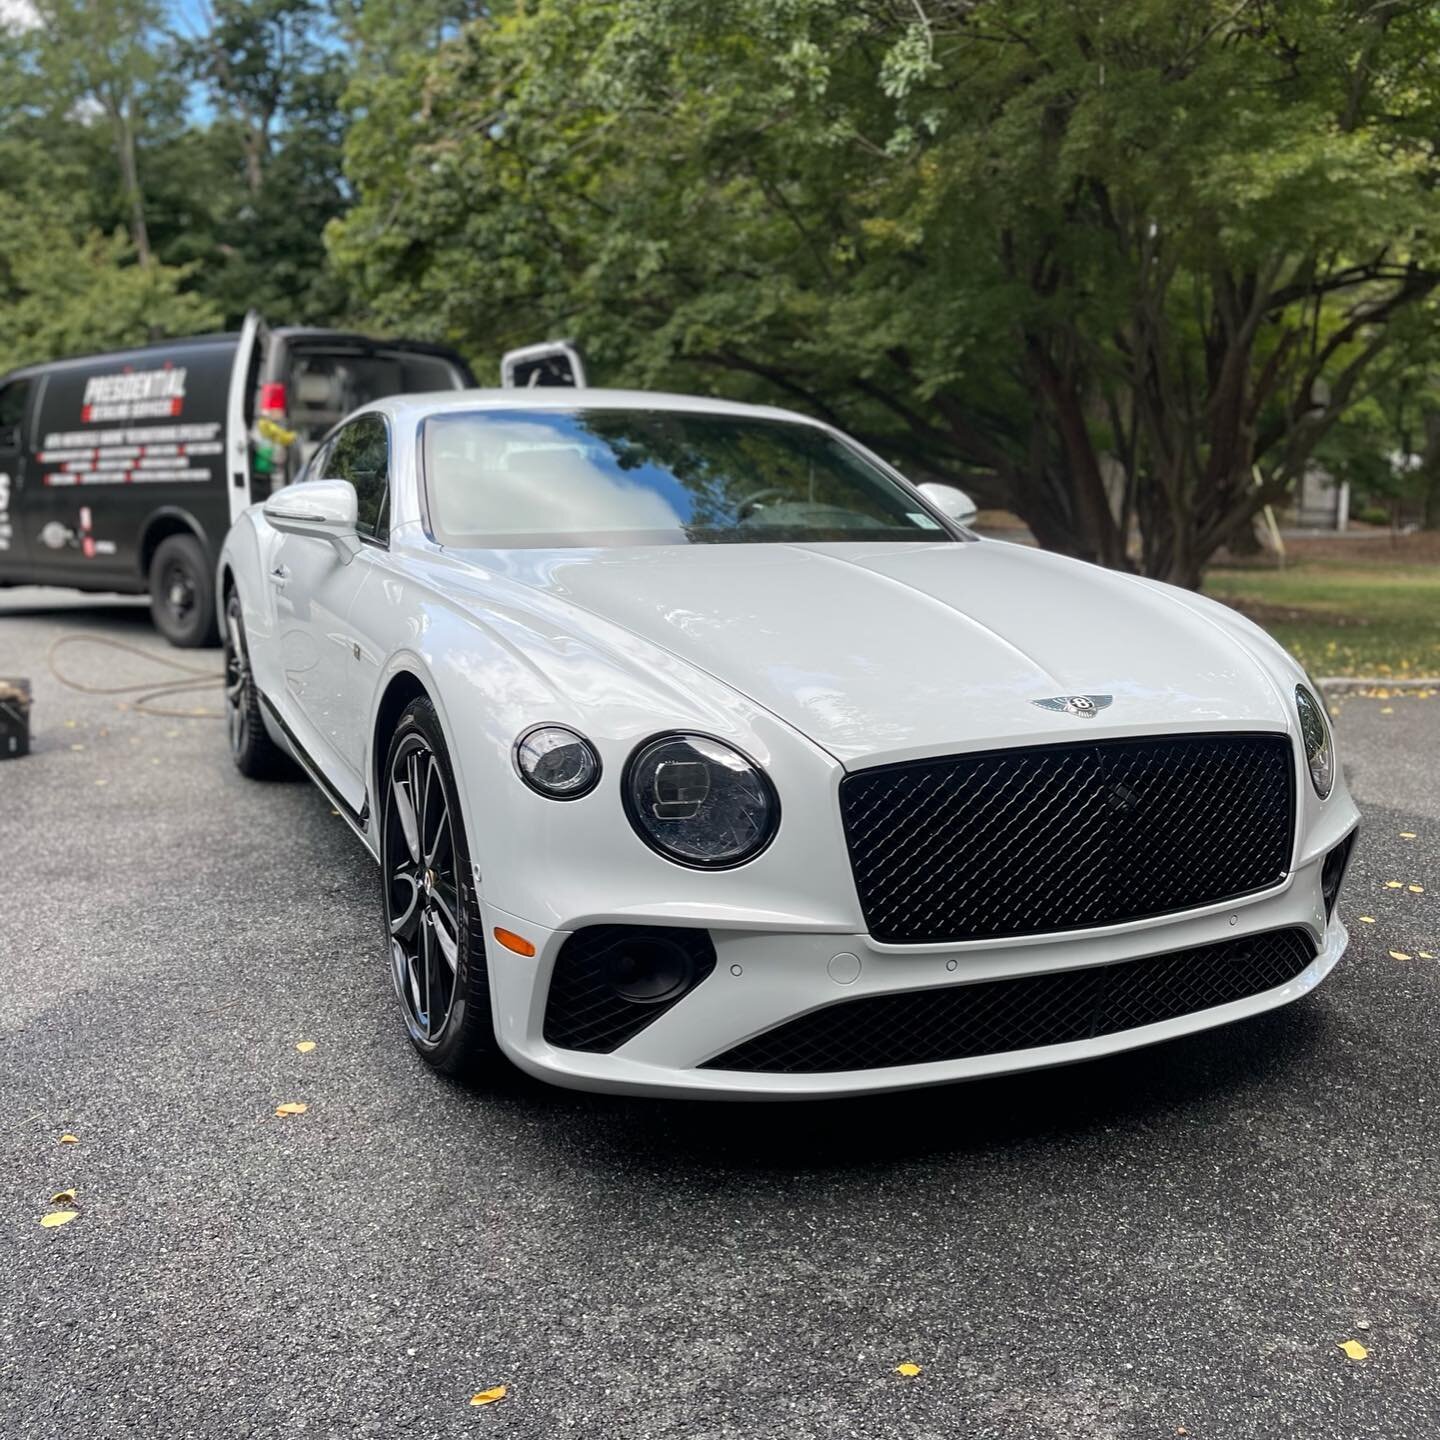 B E N T L E Y &hellip;.

@bentleyparamus @bentleyofedison @bentleymotors 
______________________________
Presidential Detailing Services LLC.
Servicing the New Jersey area. 
Schedule an appointment for that
Presidential treatment.
___________________